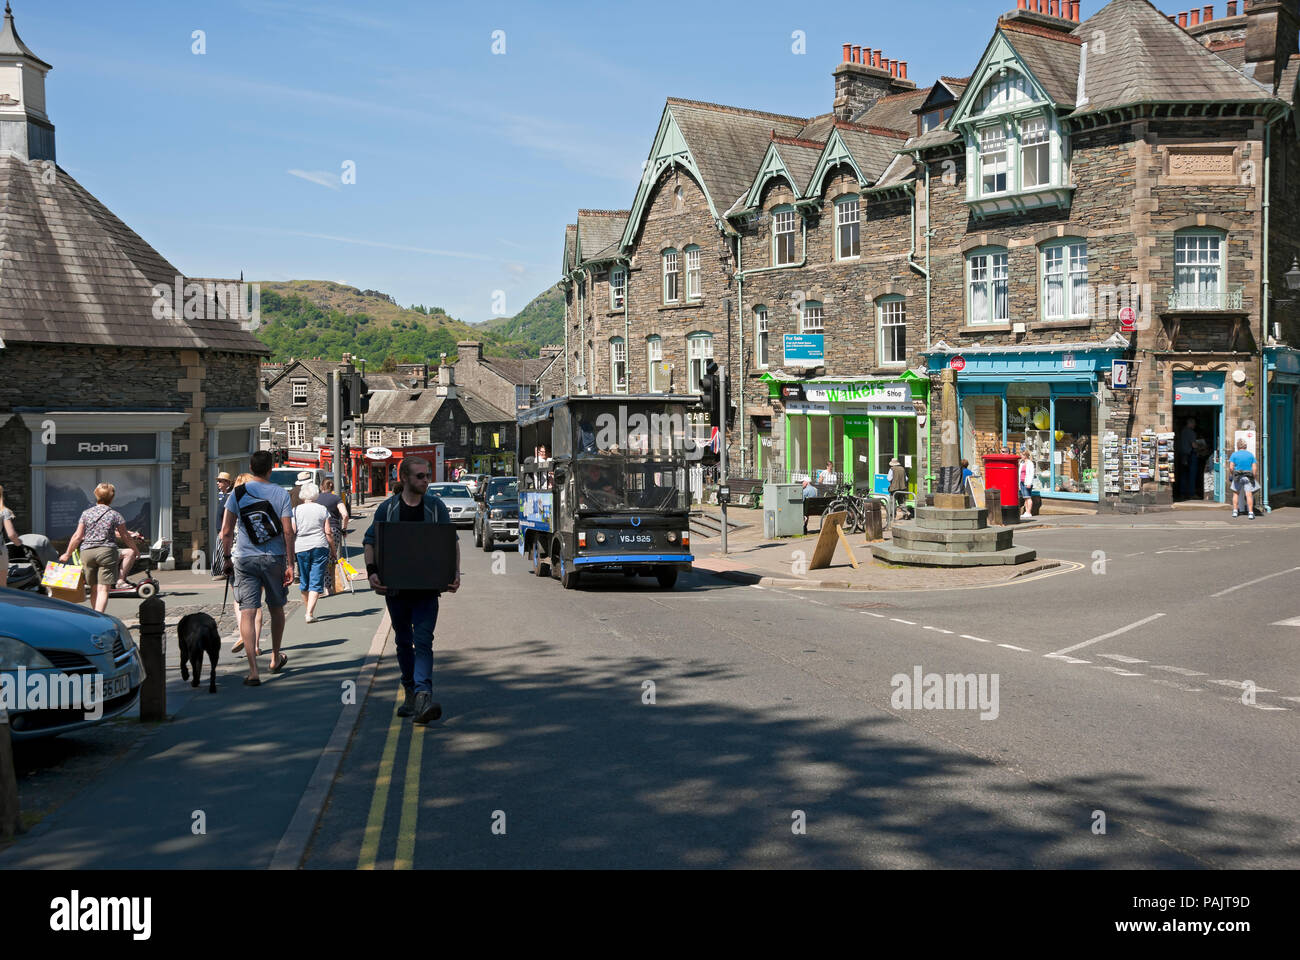 People tourists visitors in the town centre in summer Ambleside Cumbria England UK United Kingdom GB Great Britain Stock Photo